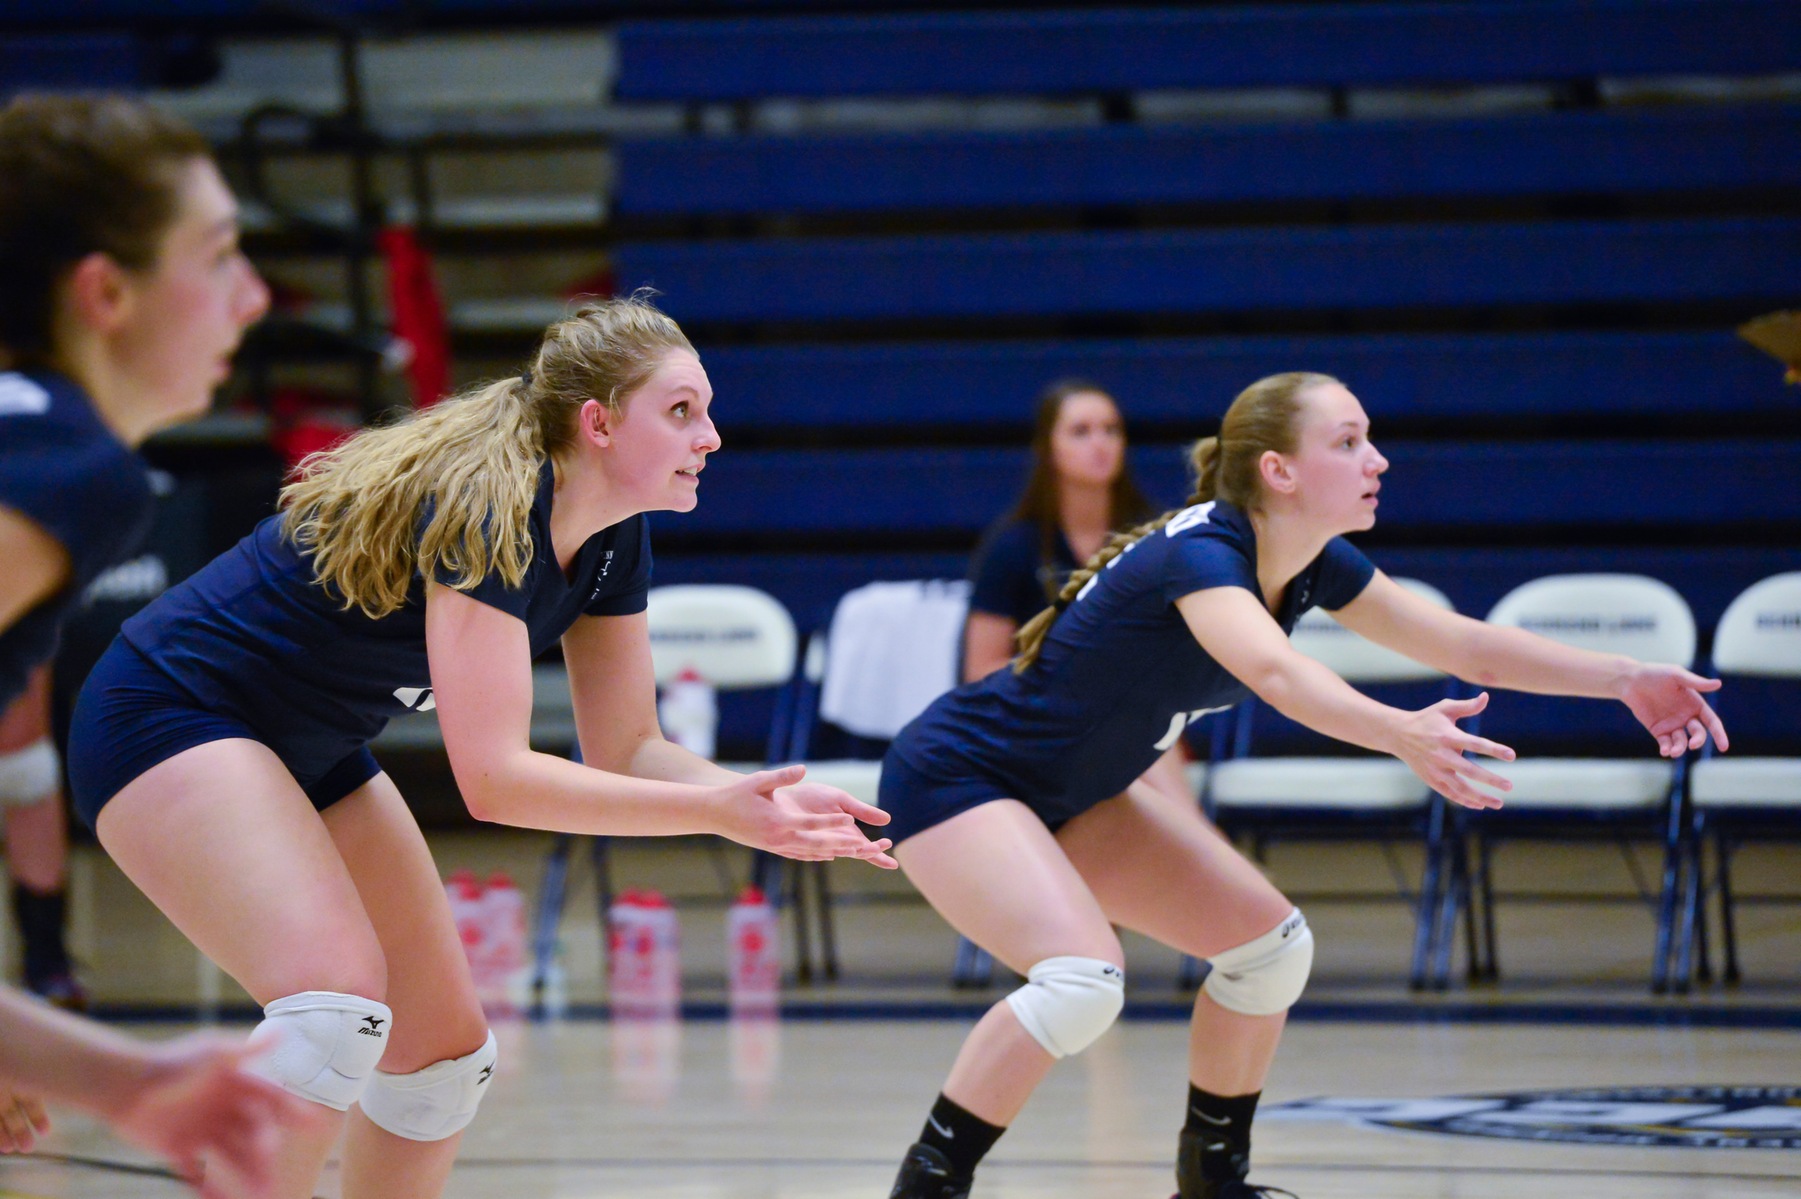 Women's Volleyball Opens Season at Morrisville State Tournament